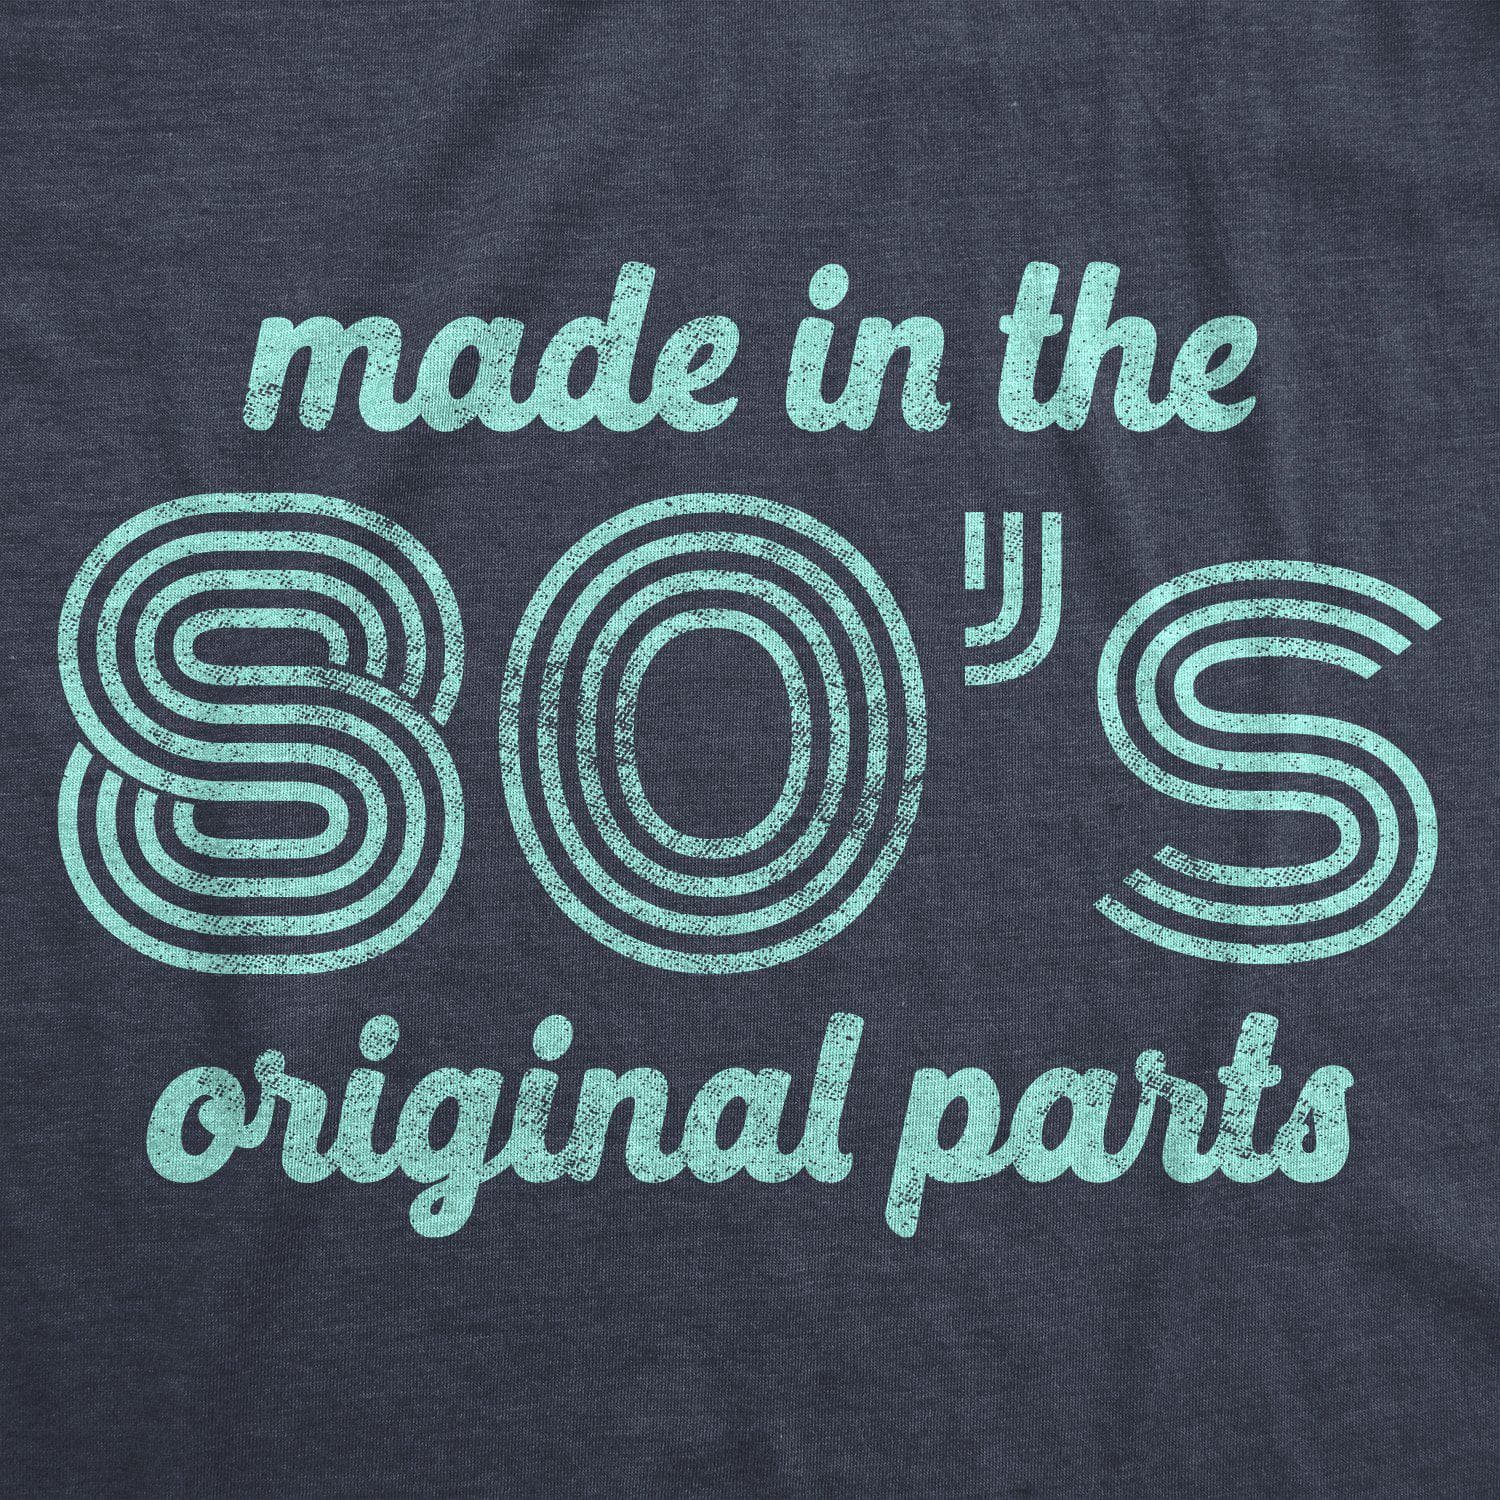 Made In The 80s Original Parts Men's Tshirt - Crazy Dog T-Shirts